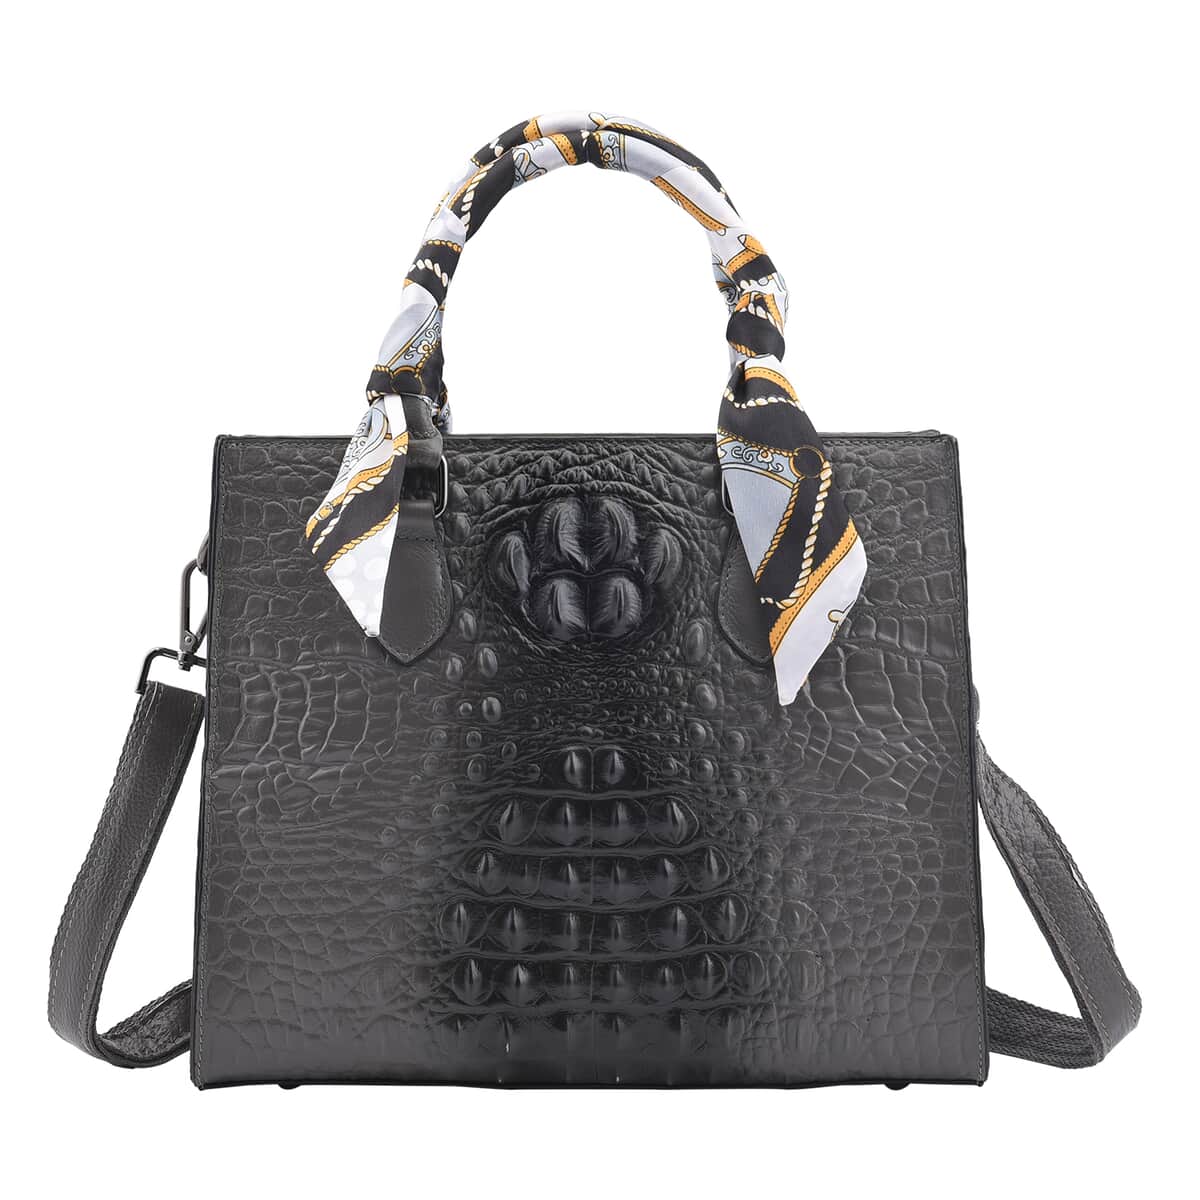 Black Croc-Embossed Genuine Leather Convertible Bag (11"x4"x9.5") with Handle Drop and Shoulder Strap image number 0